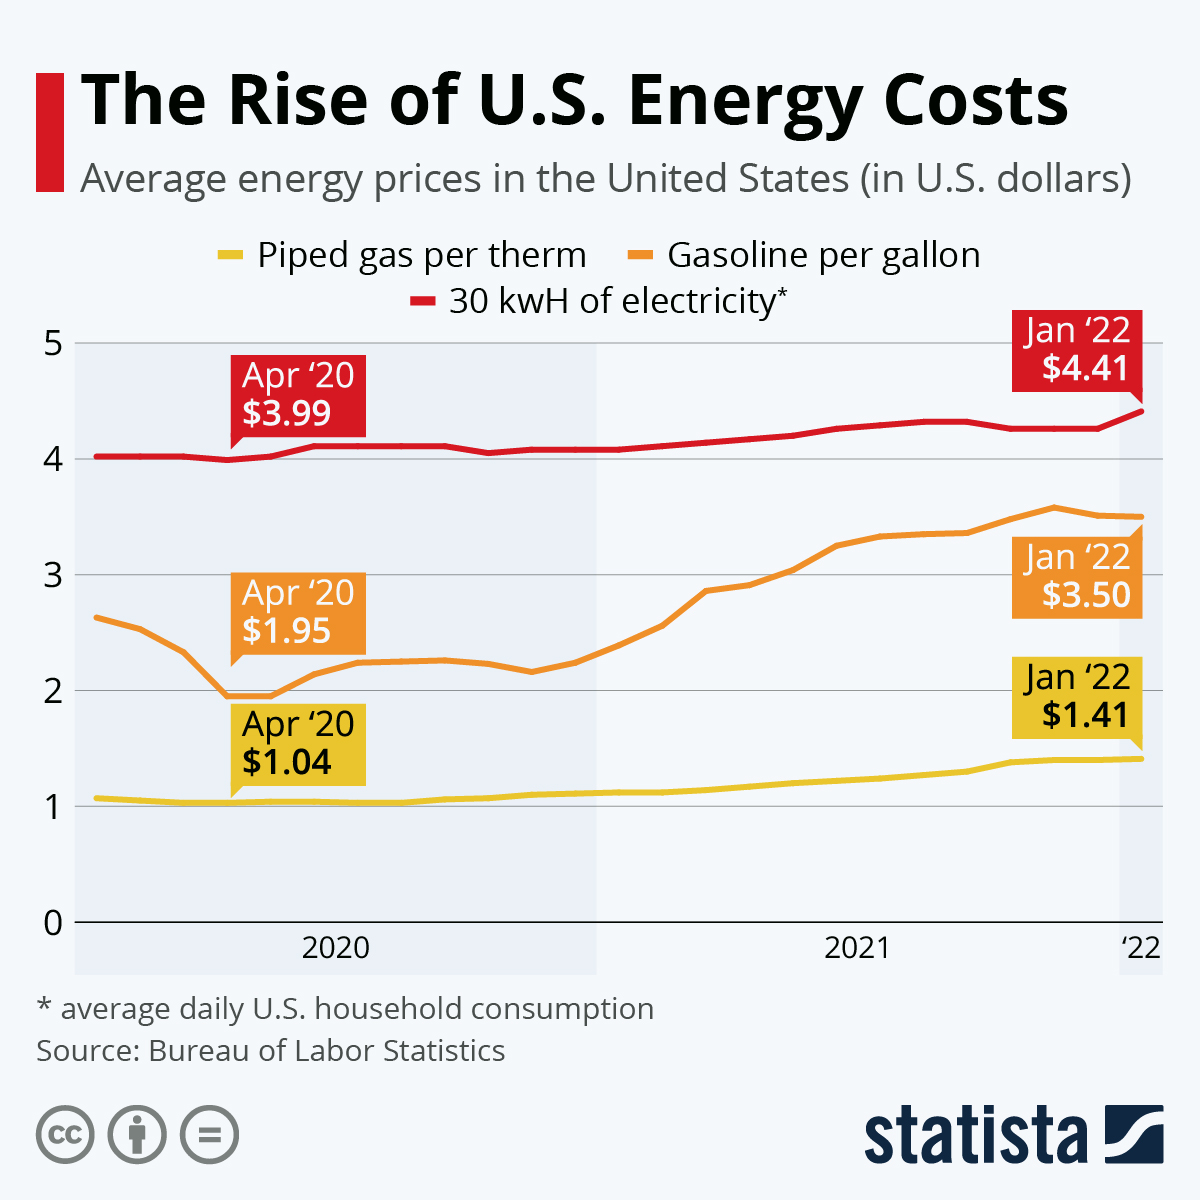 The Rise of U.S. Energy Costs